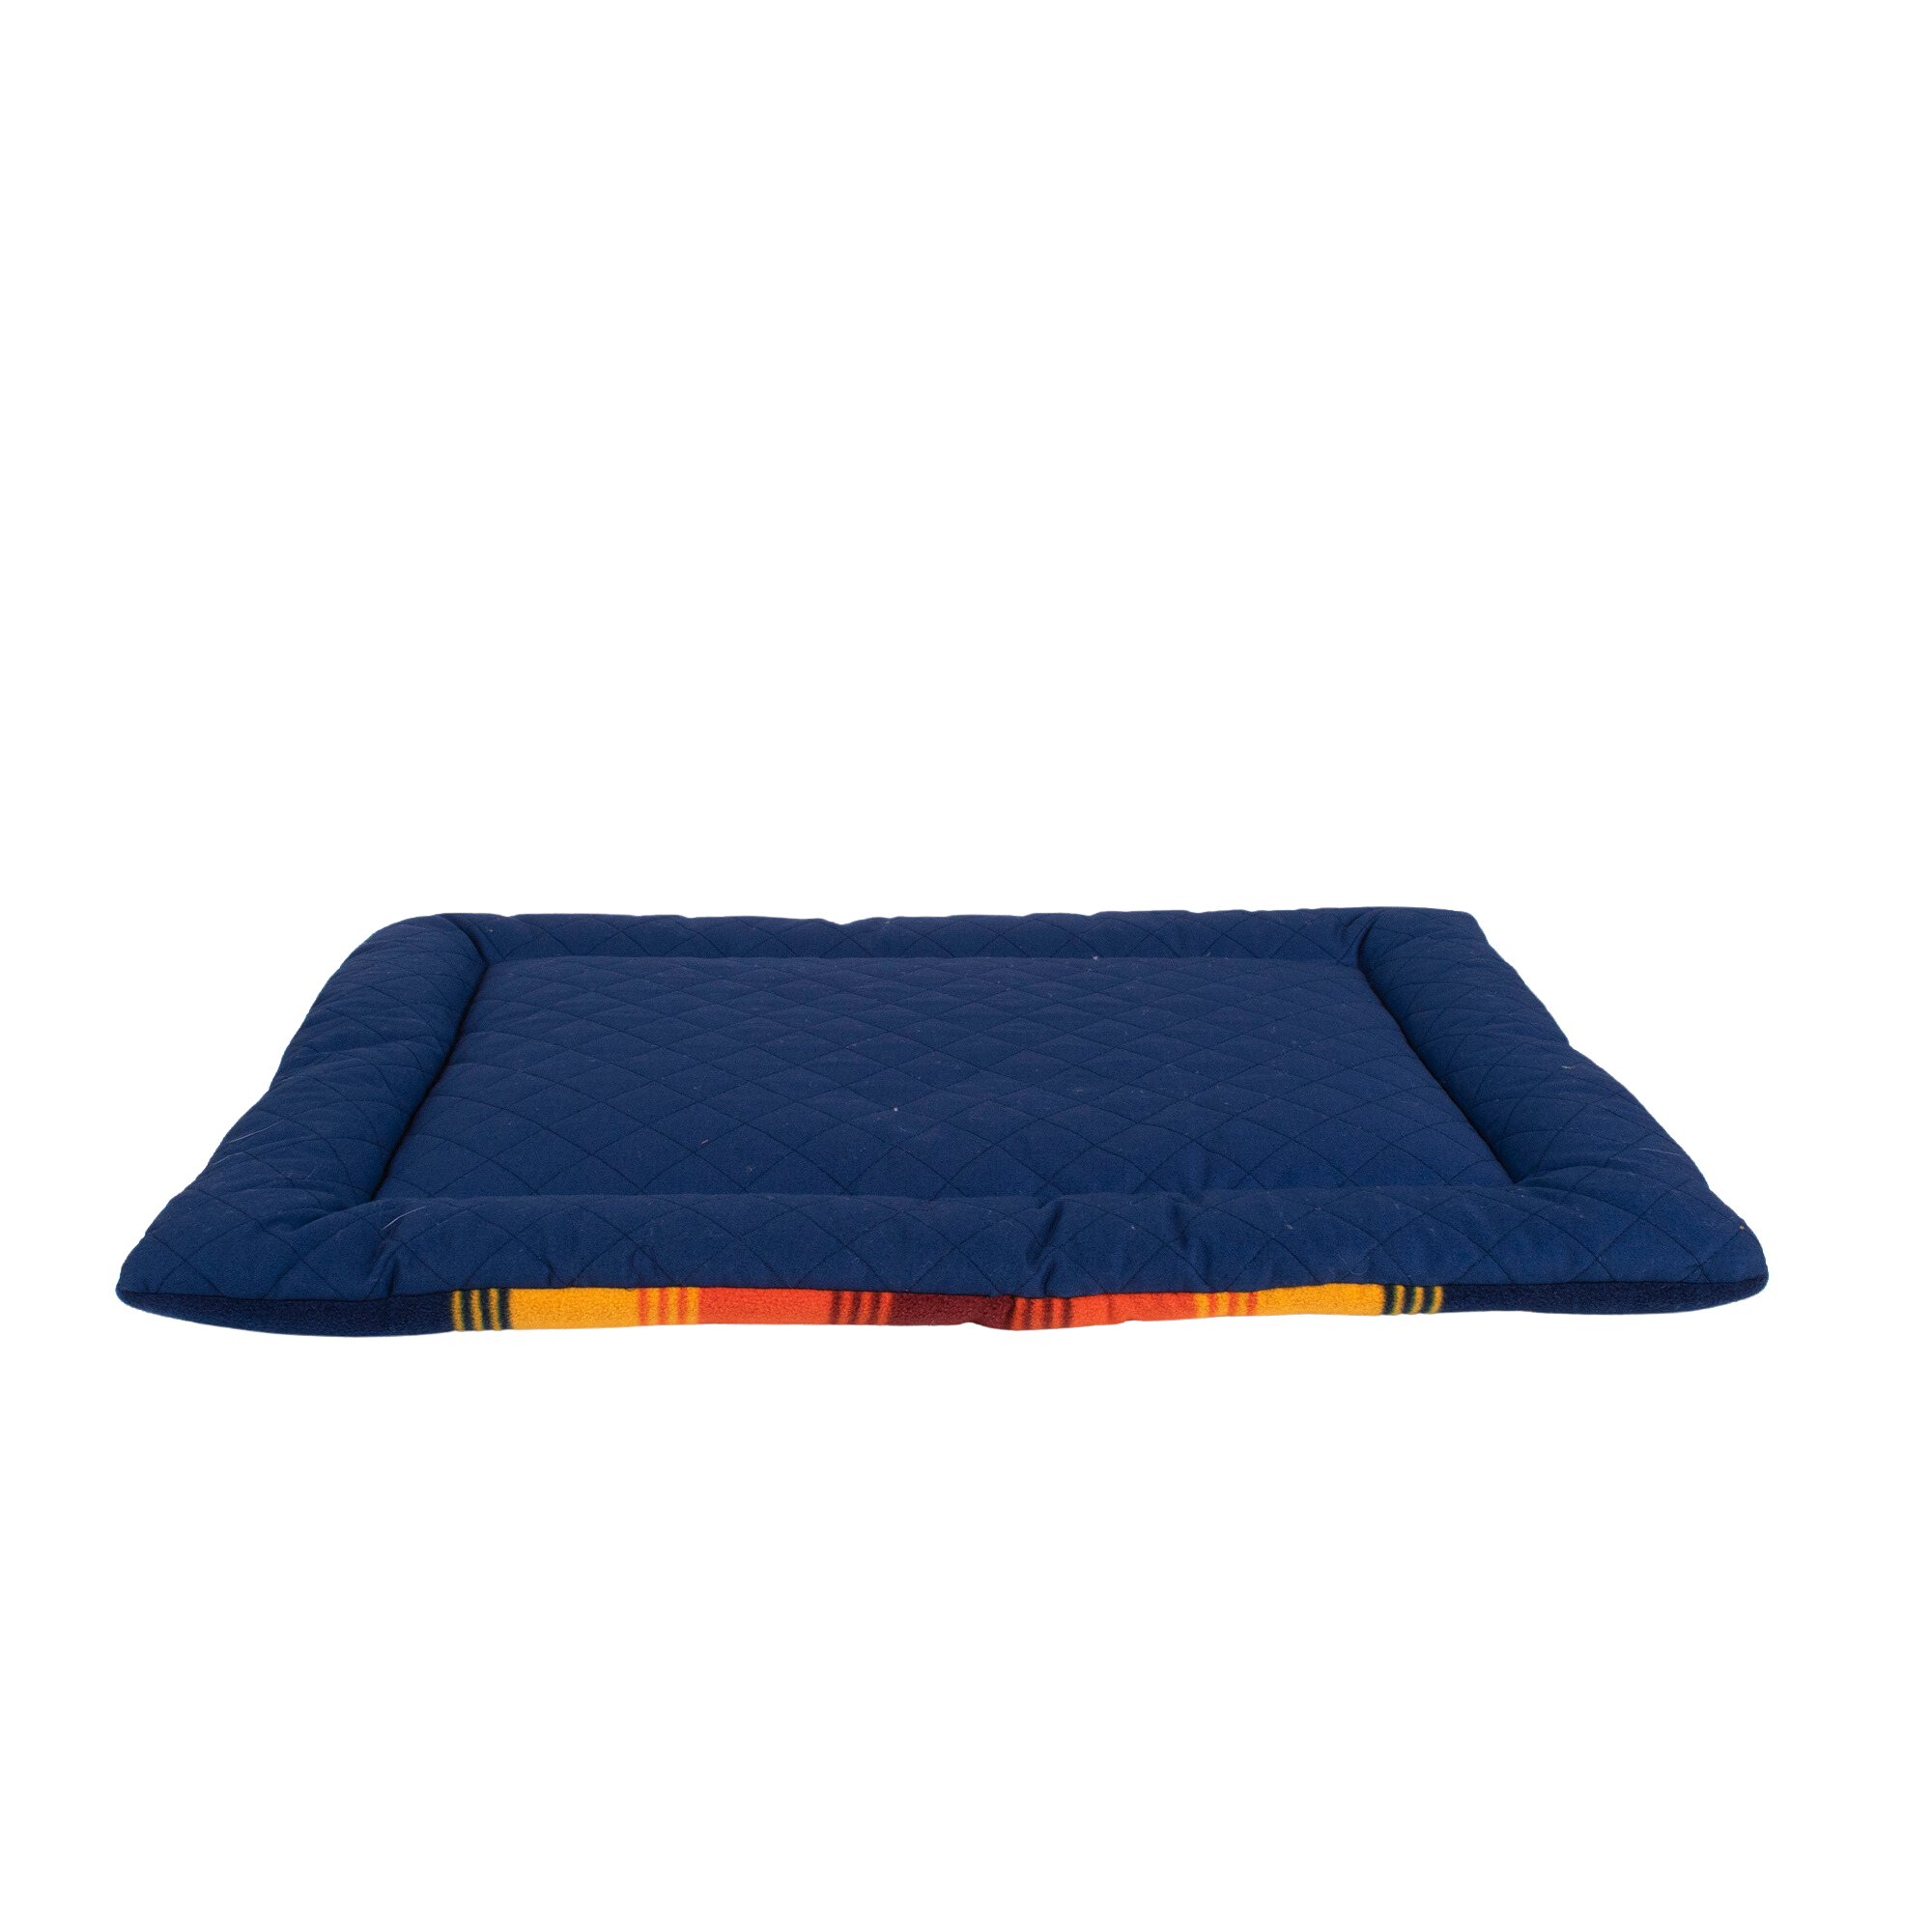 PENDLETON-DOG-BED-KENNEL-MAT-CRATE-BLUE-YELLOW-RED-ORANGE-GRAND-CANYON-NATIONAL-PARK